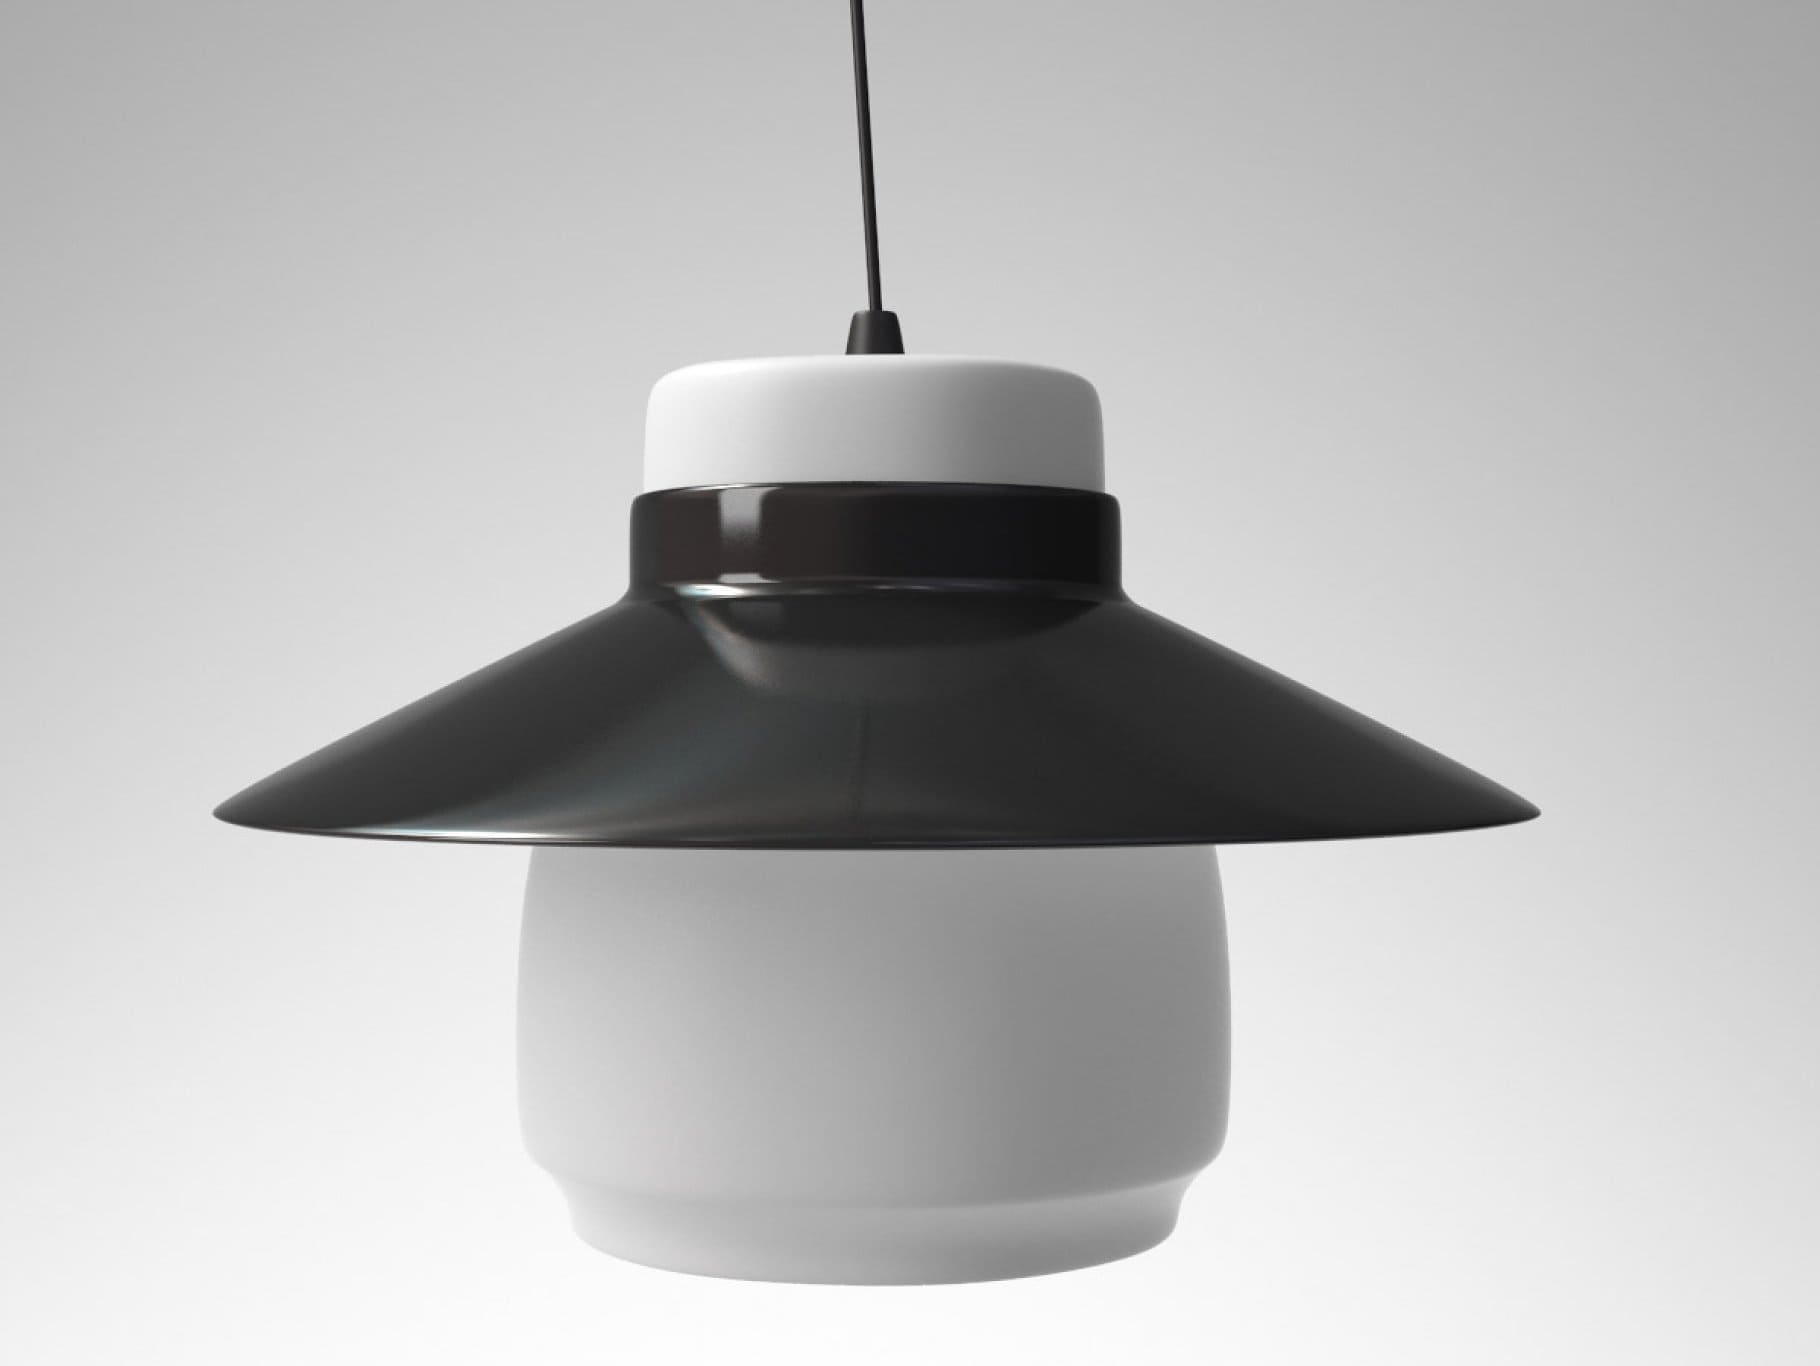 Lento lamp with a thick snow-white middle.